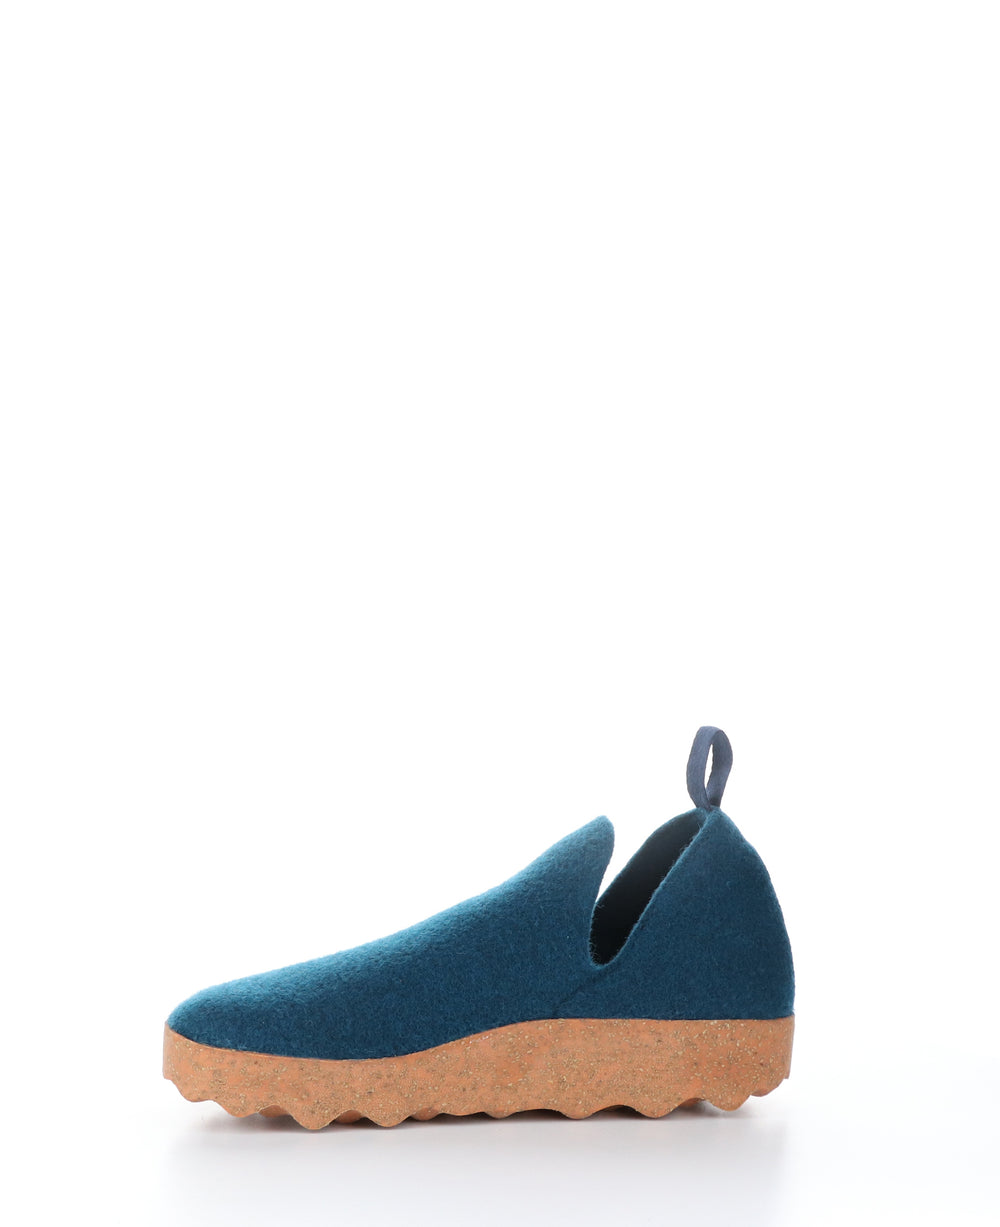 CITY Peacock Blue Round Toe Shoes